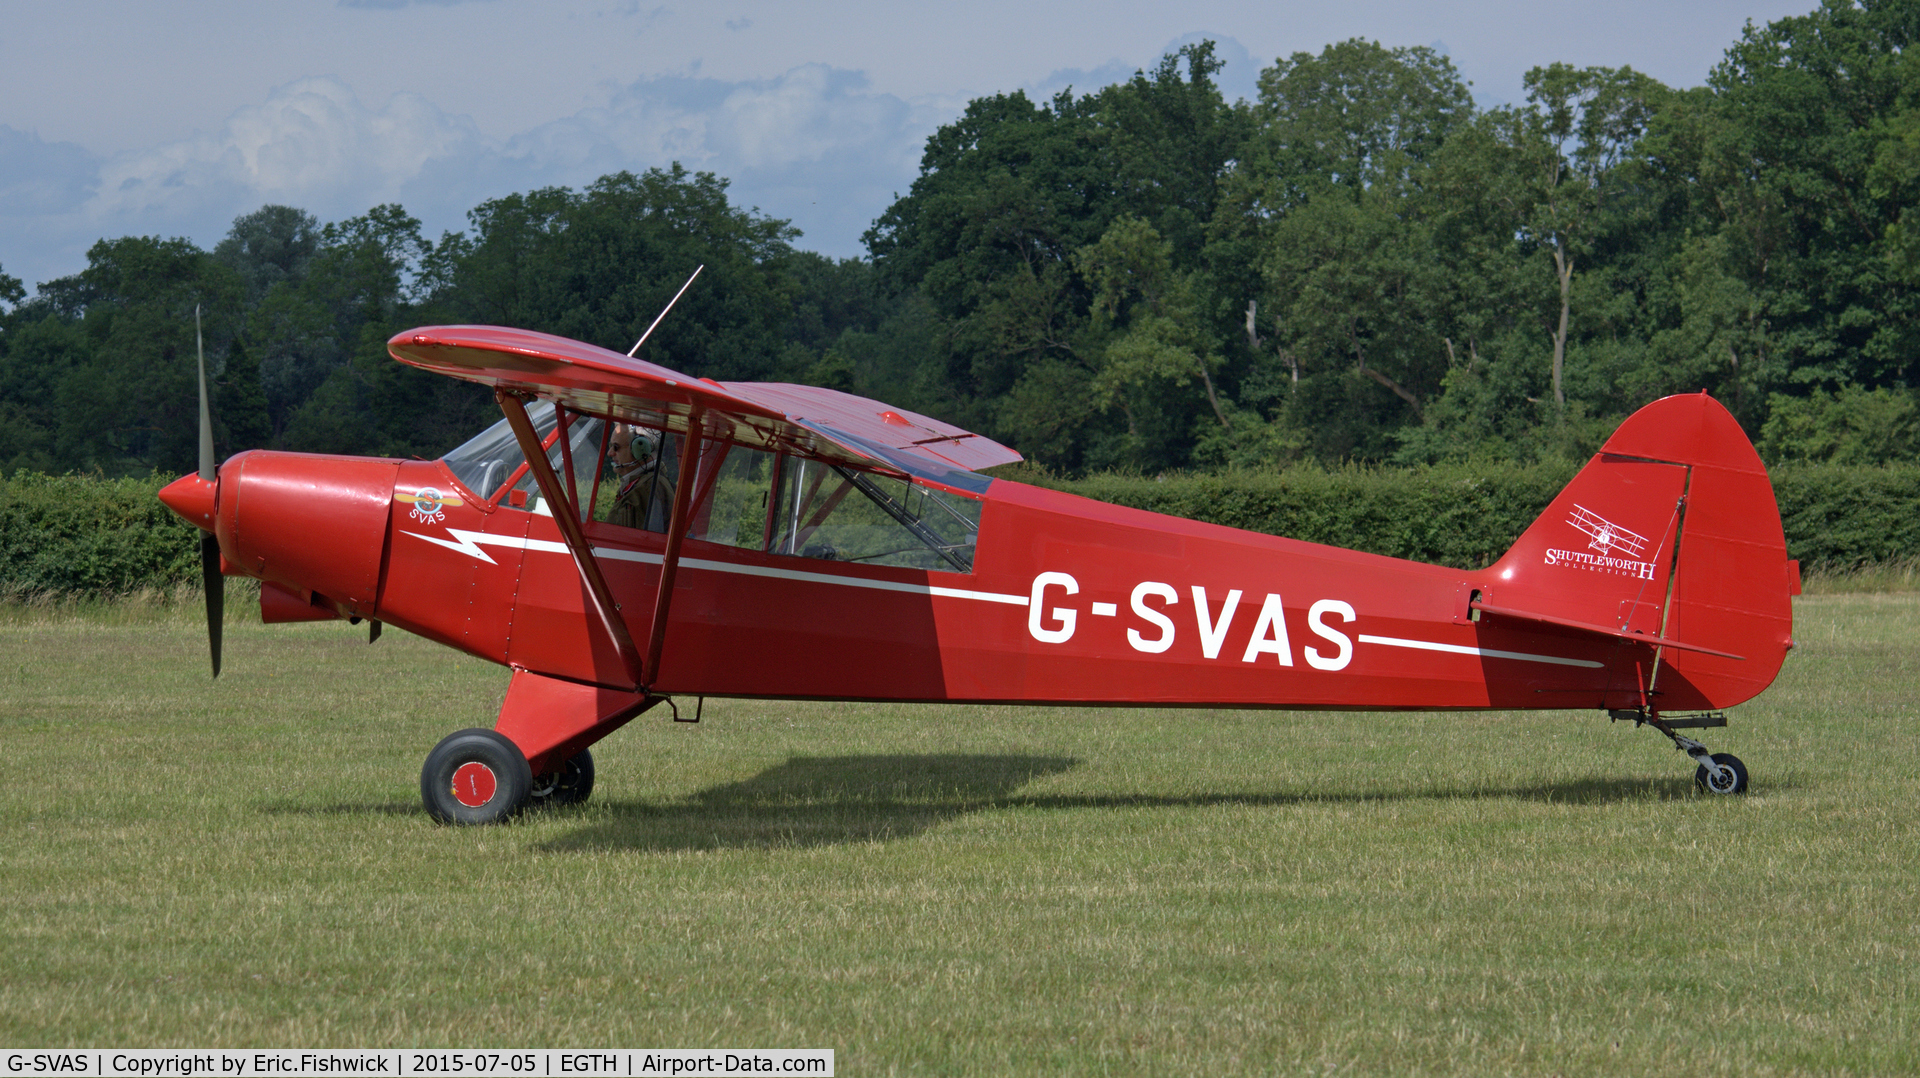 G-SVAS, 1961 Piper PA-18-150 Super Cub C/N 18-7605, x. G-SVAS at the Shuttleworth Military Pagent Airshow, July 2015.